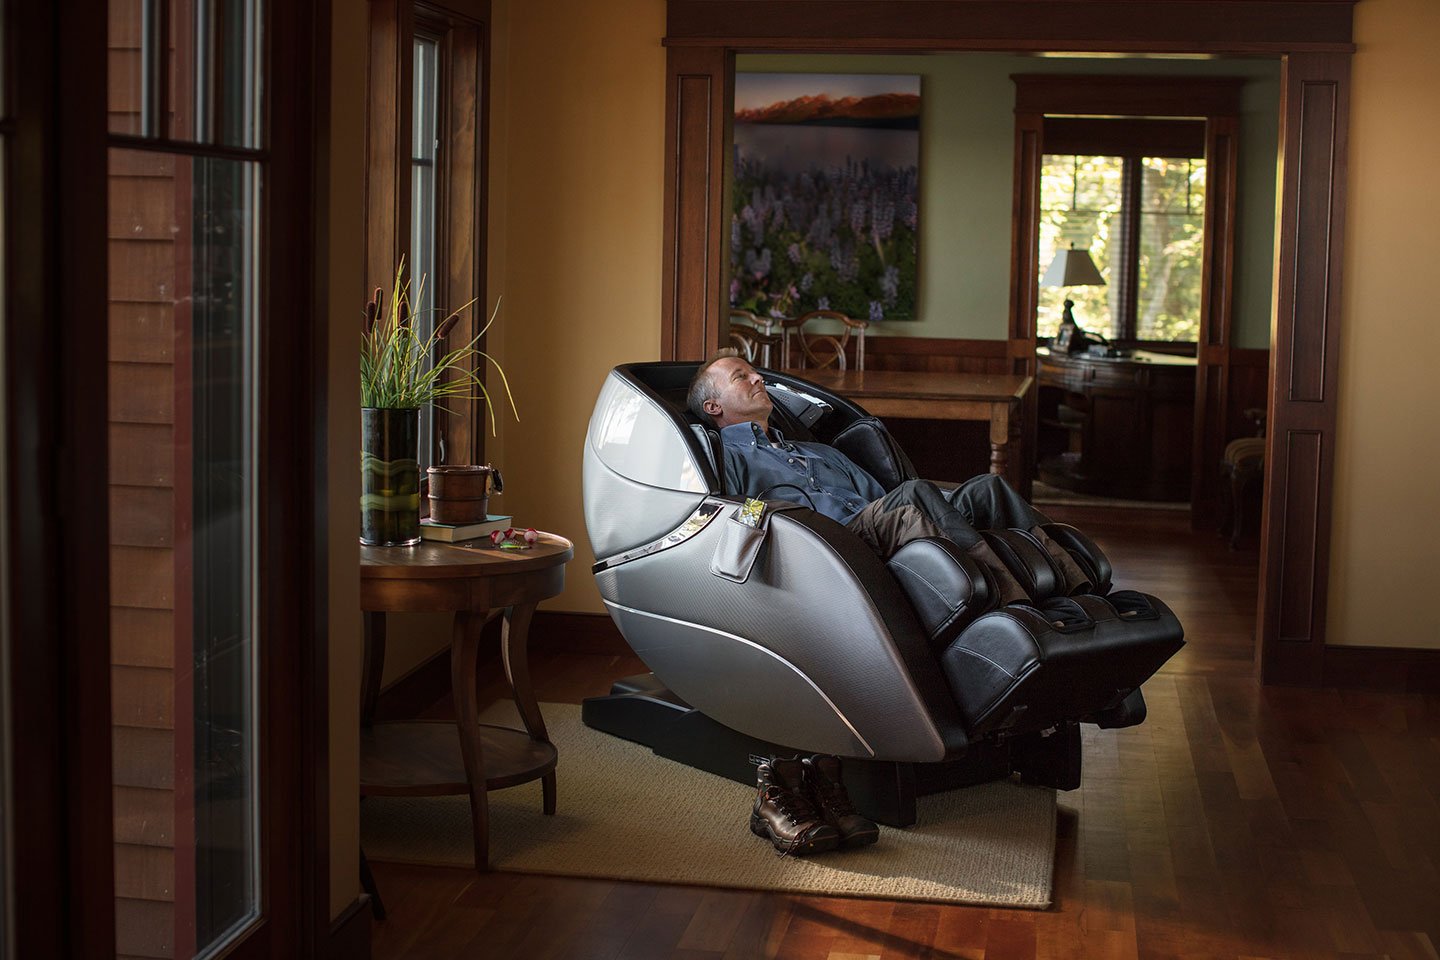 massage chair store coupon